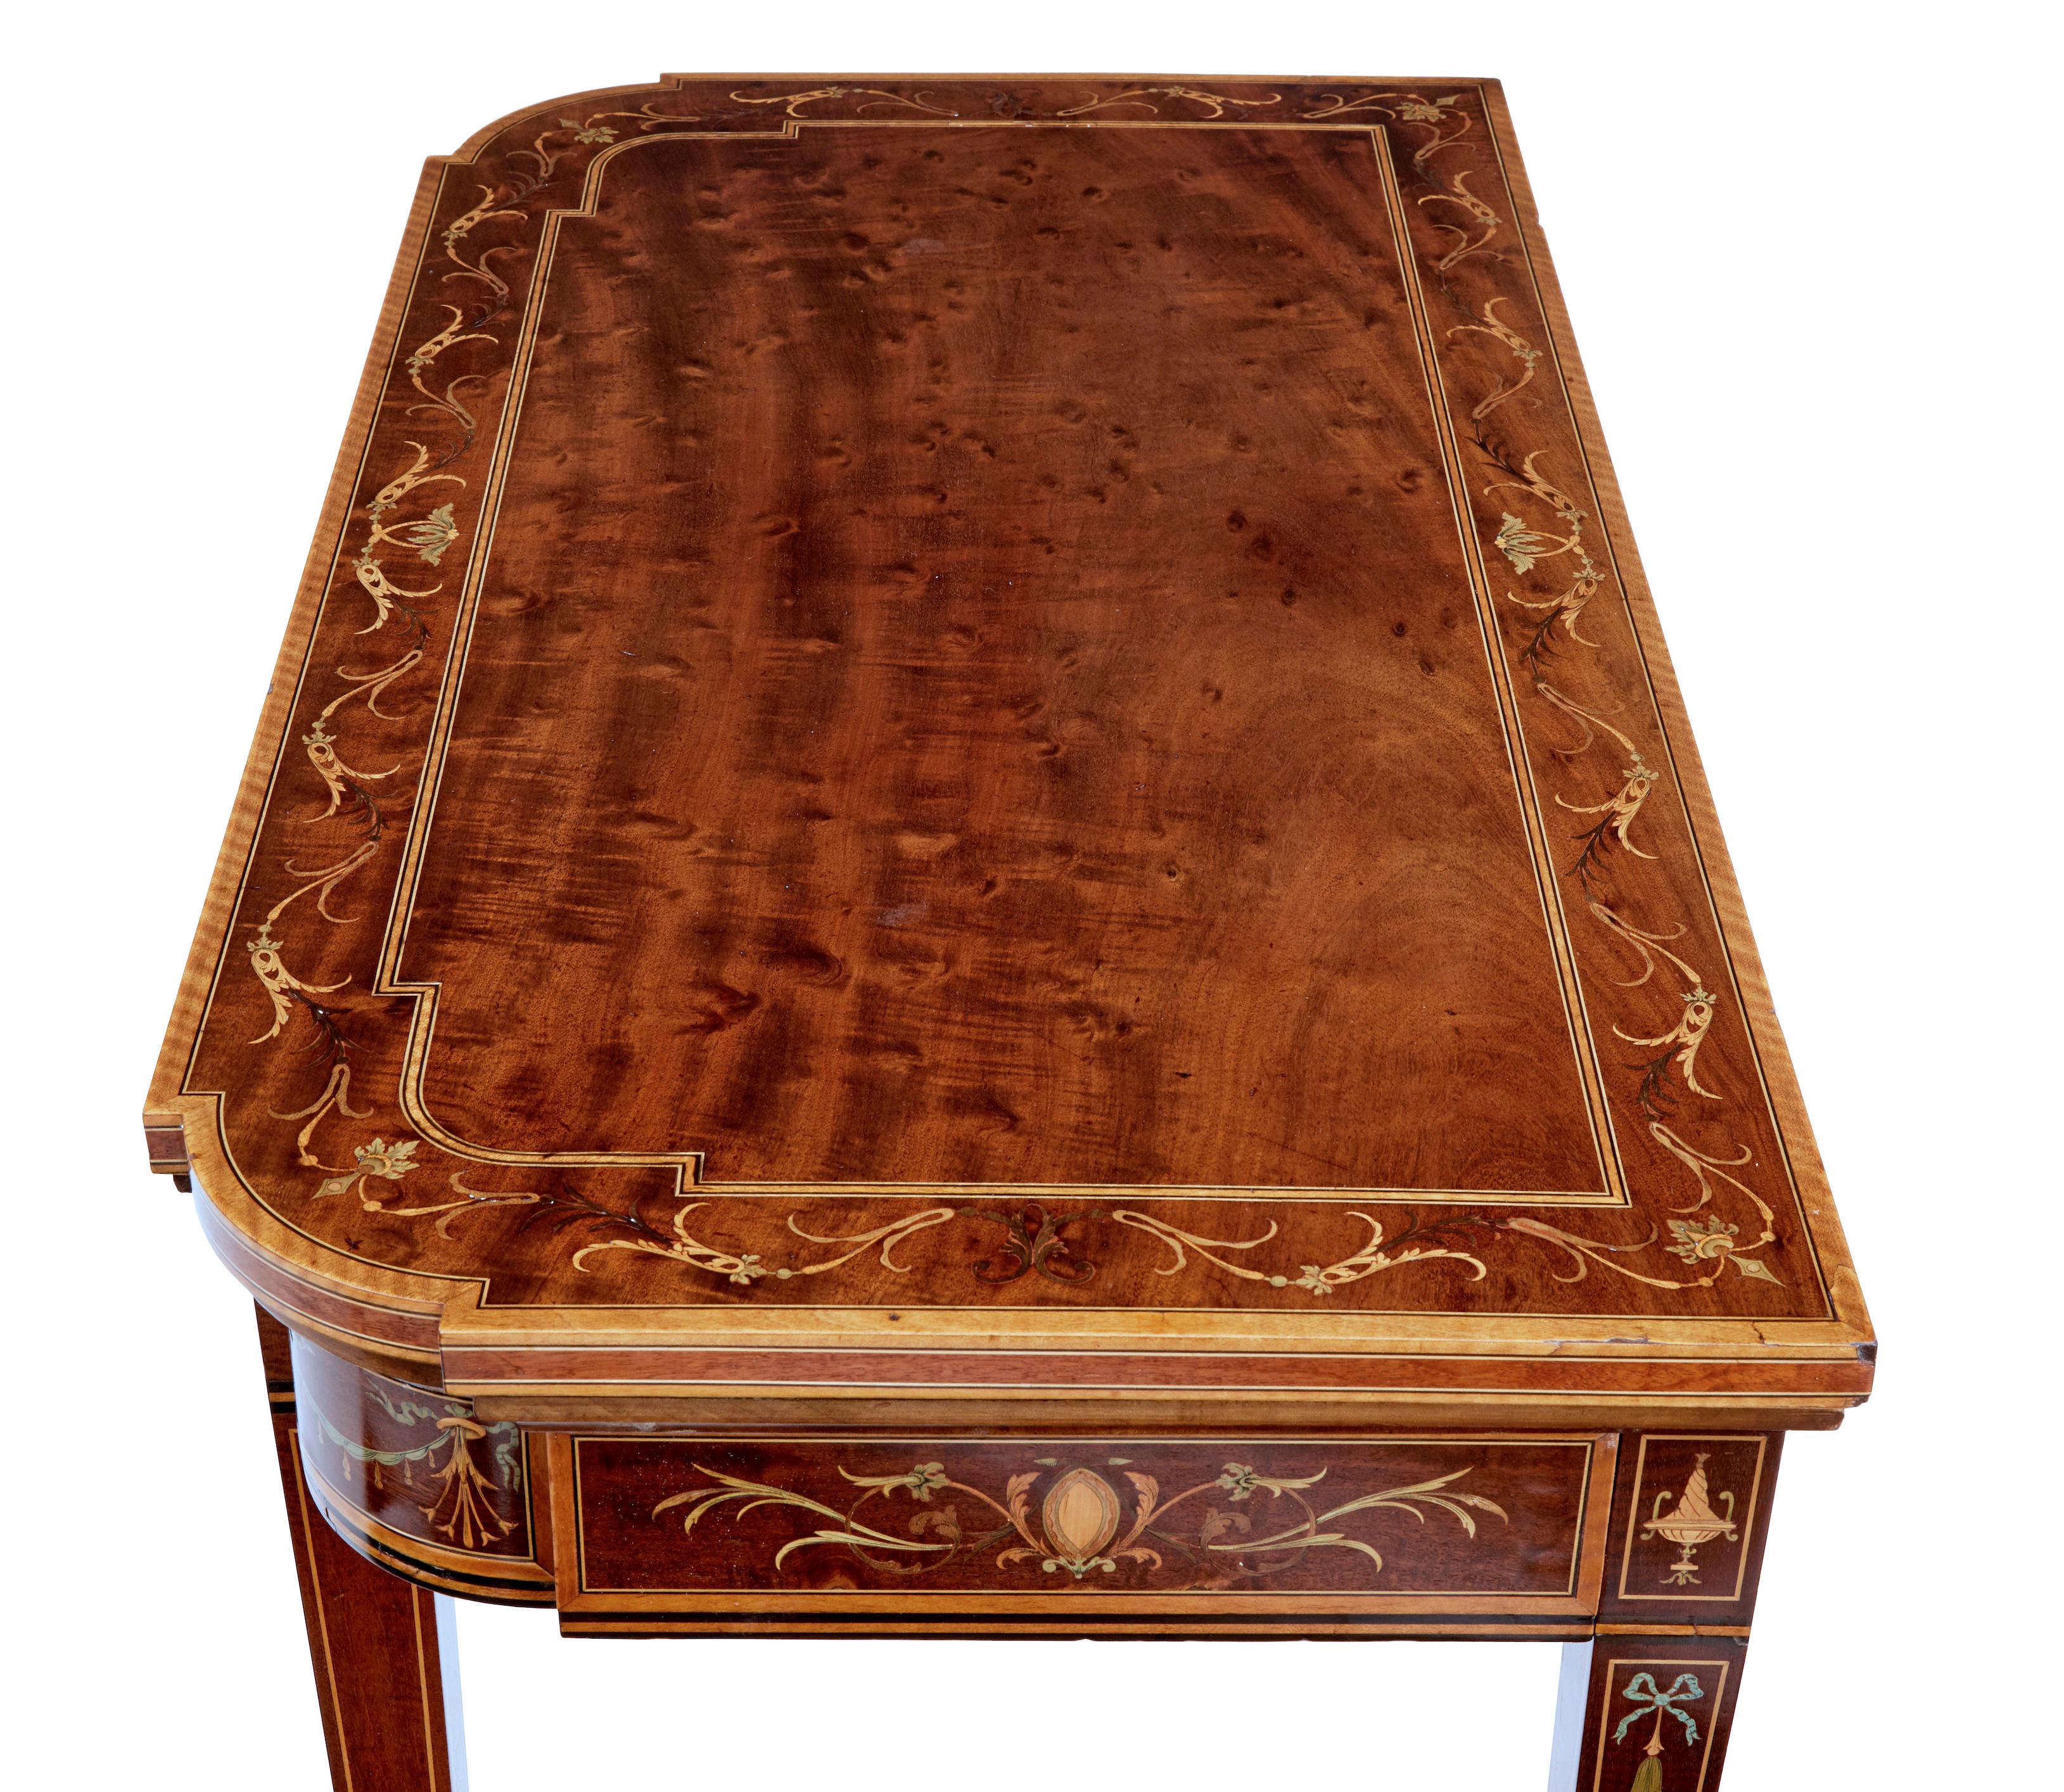 English Late 19th Century Inlaid Mahogany Card Table by Edwards and Roberts